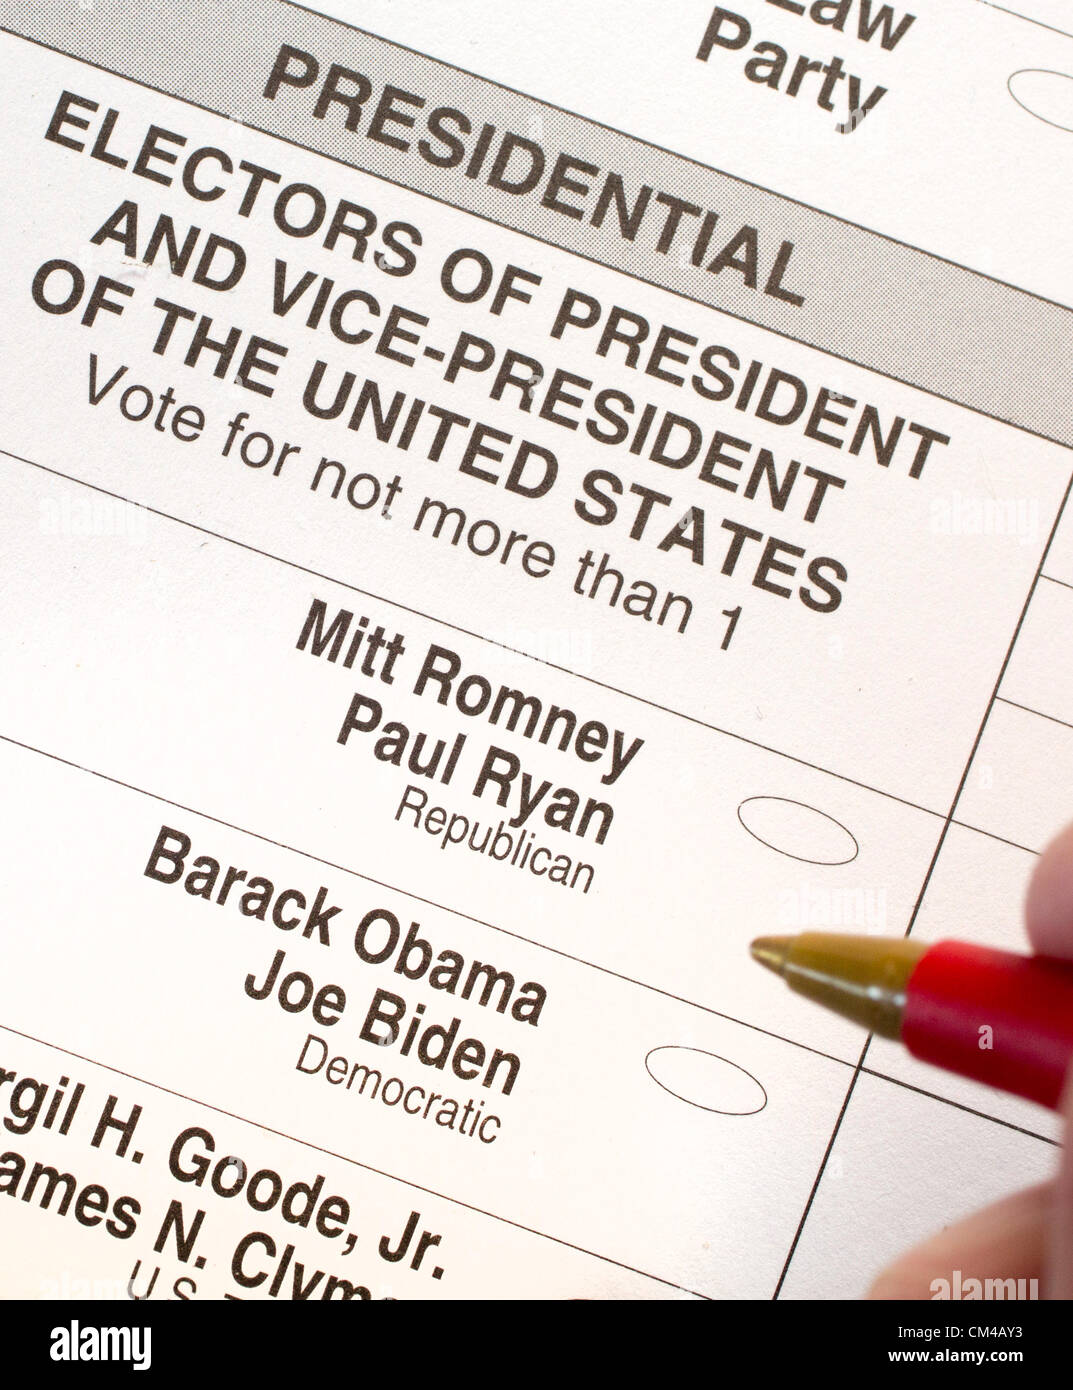 Detroit, Michigan - An absentee ballot in the 2012 U.S. presidential election. Stock Photo